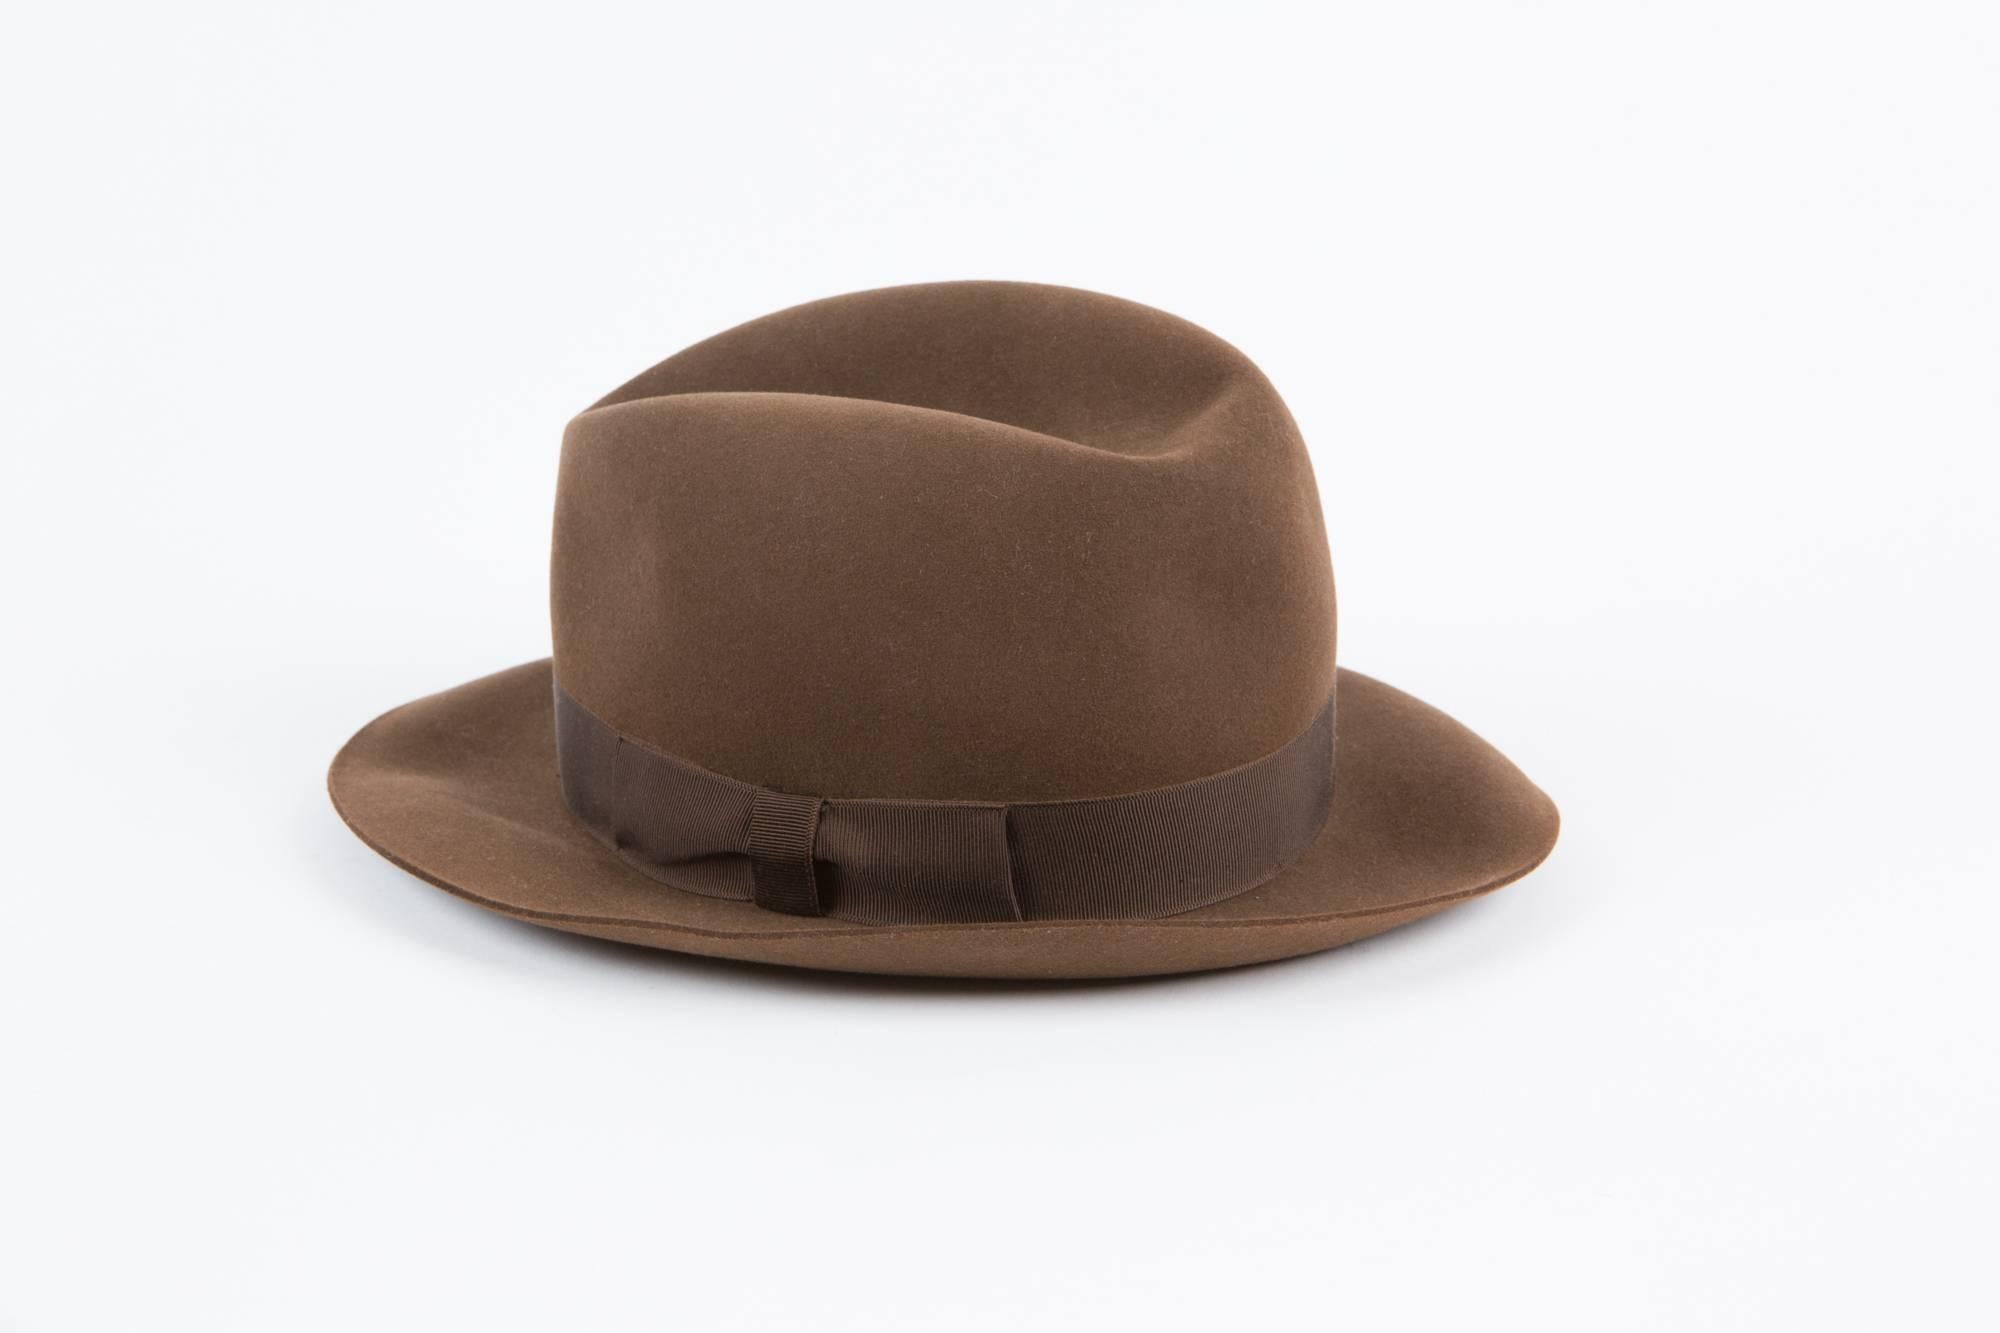 Brown chocolate wool grosgrain band Hermès fedora hat featuring a darker brown grosgrain bow at the centre. 
Border width: 2,3in. (6 cm)
Inside size label 55. 100% wool. 
In excellent vintage condition. Made in France.